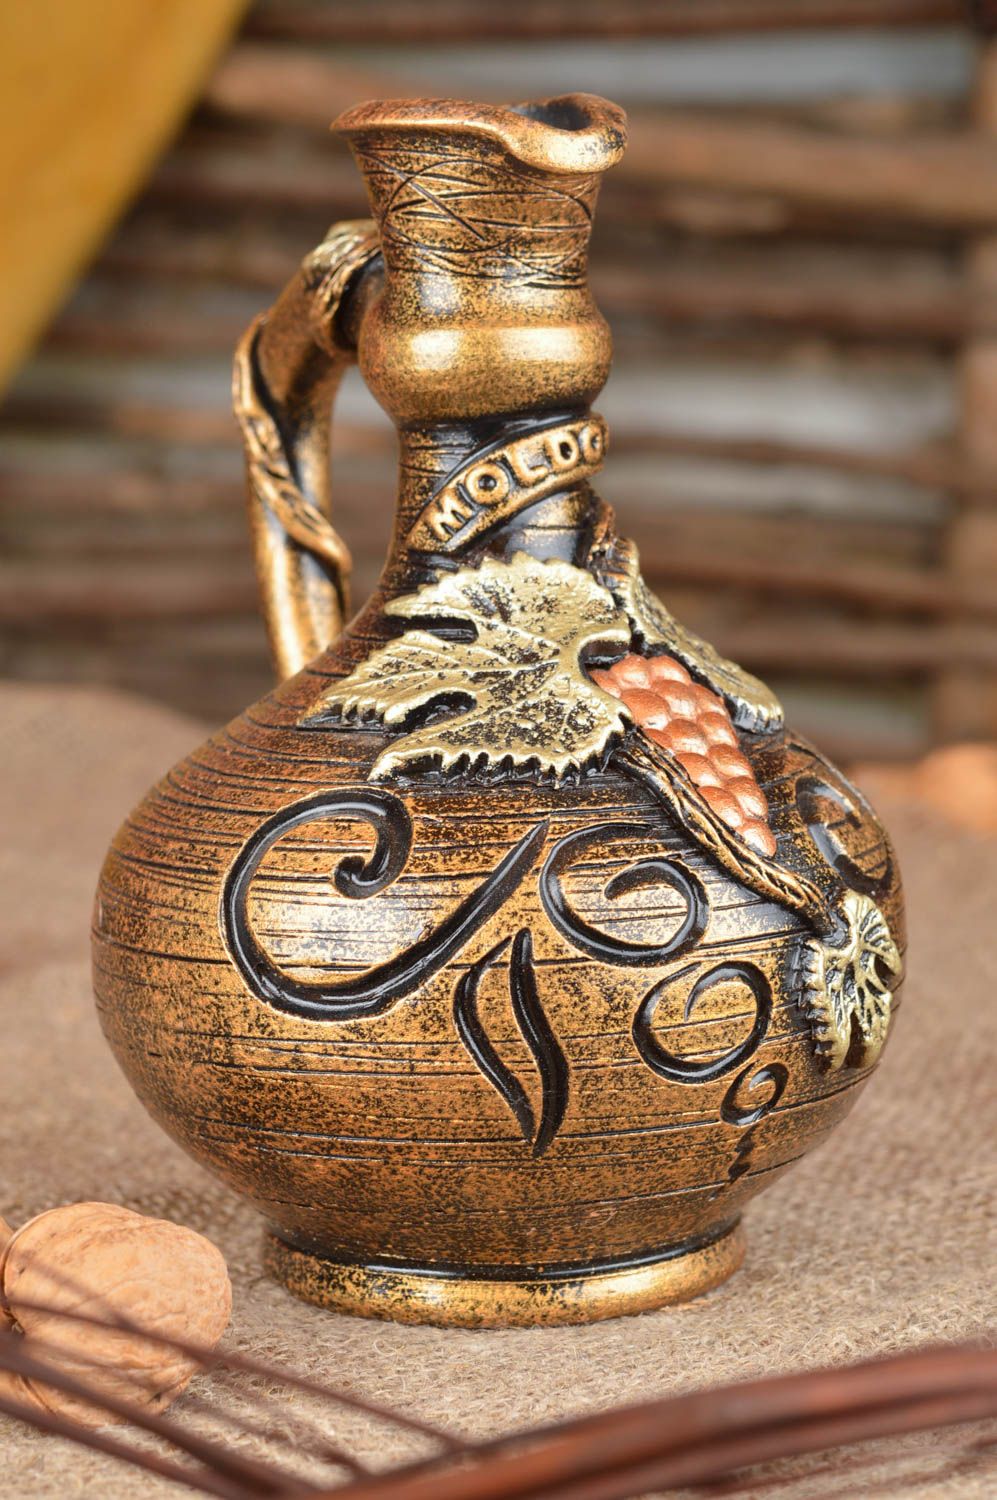 15 oz handmade ceramic wine decanter in gold color with handle and molded grapes 1,3 lb photo 1